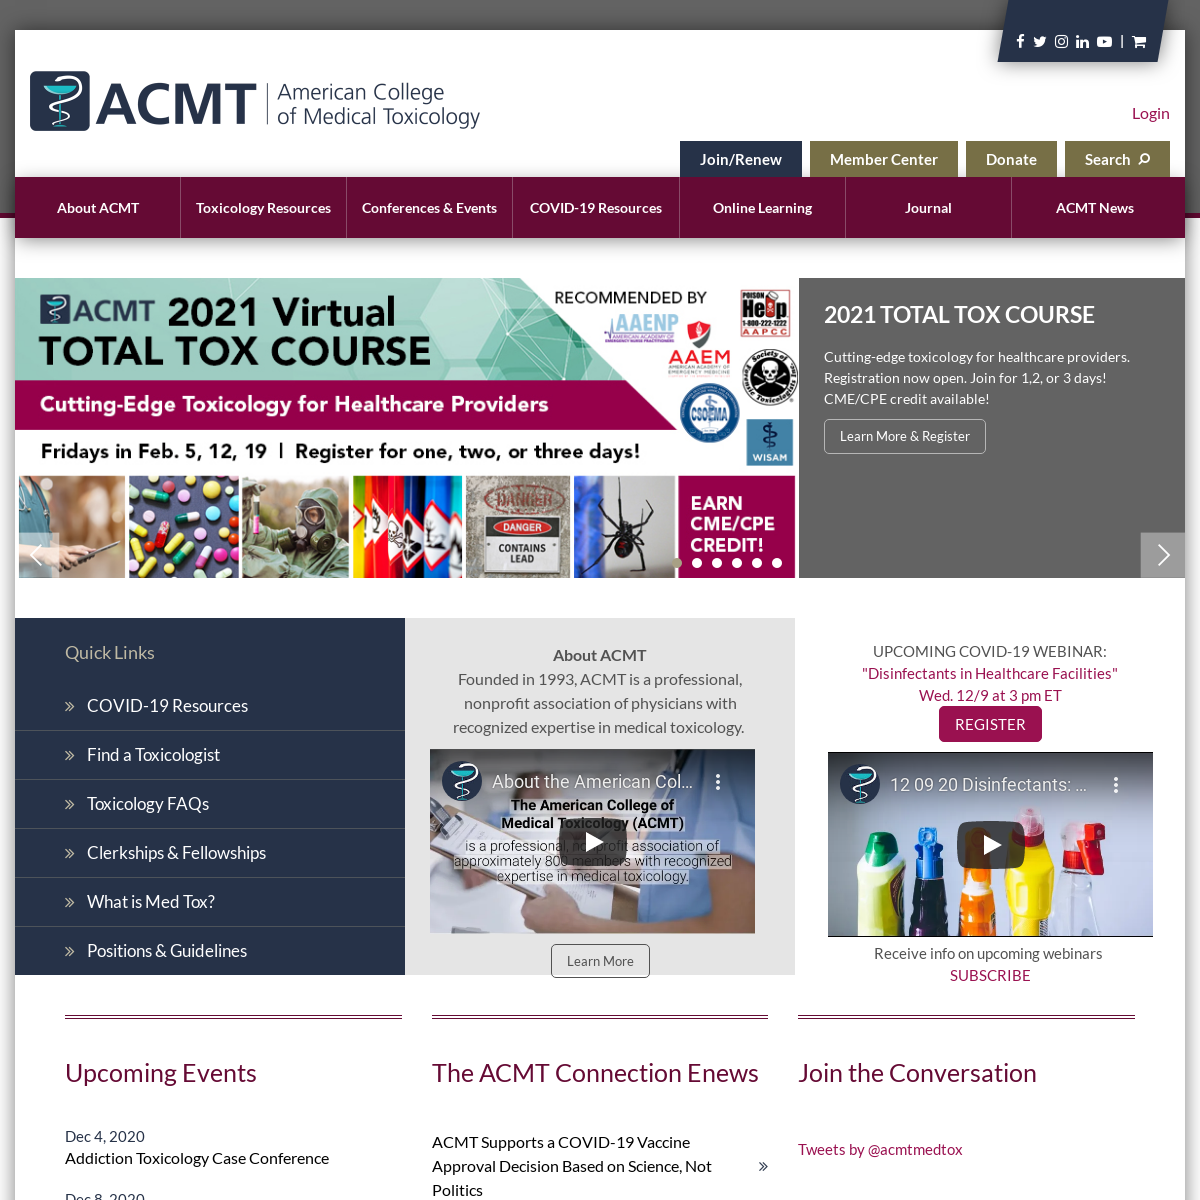 A complete backup of acmt.net